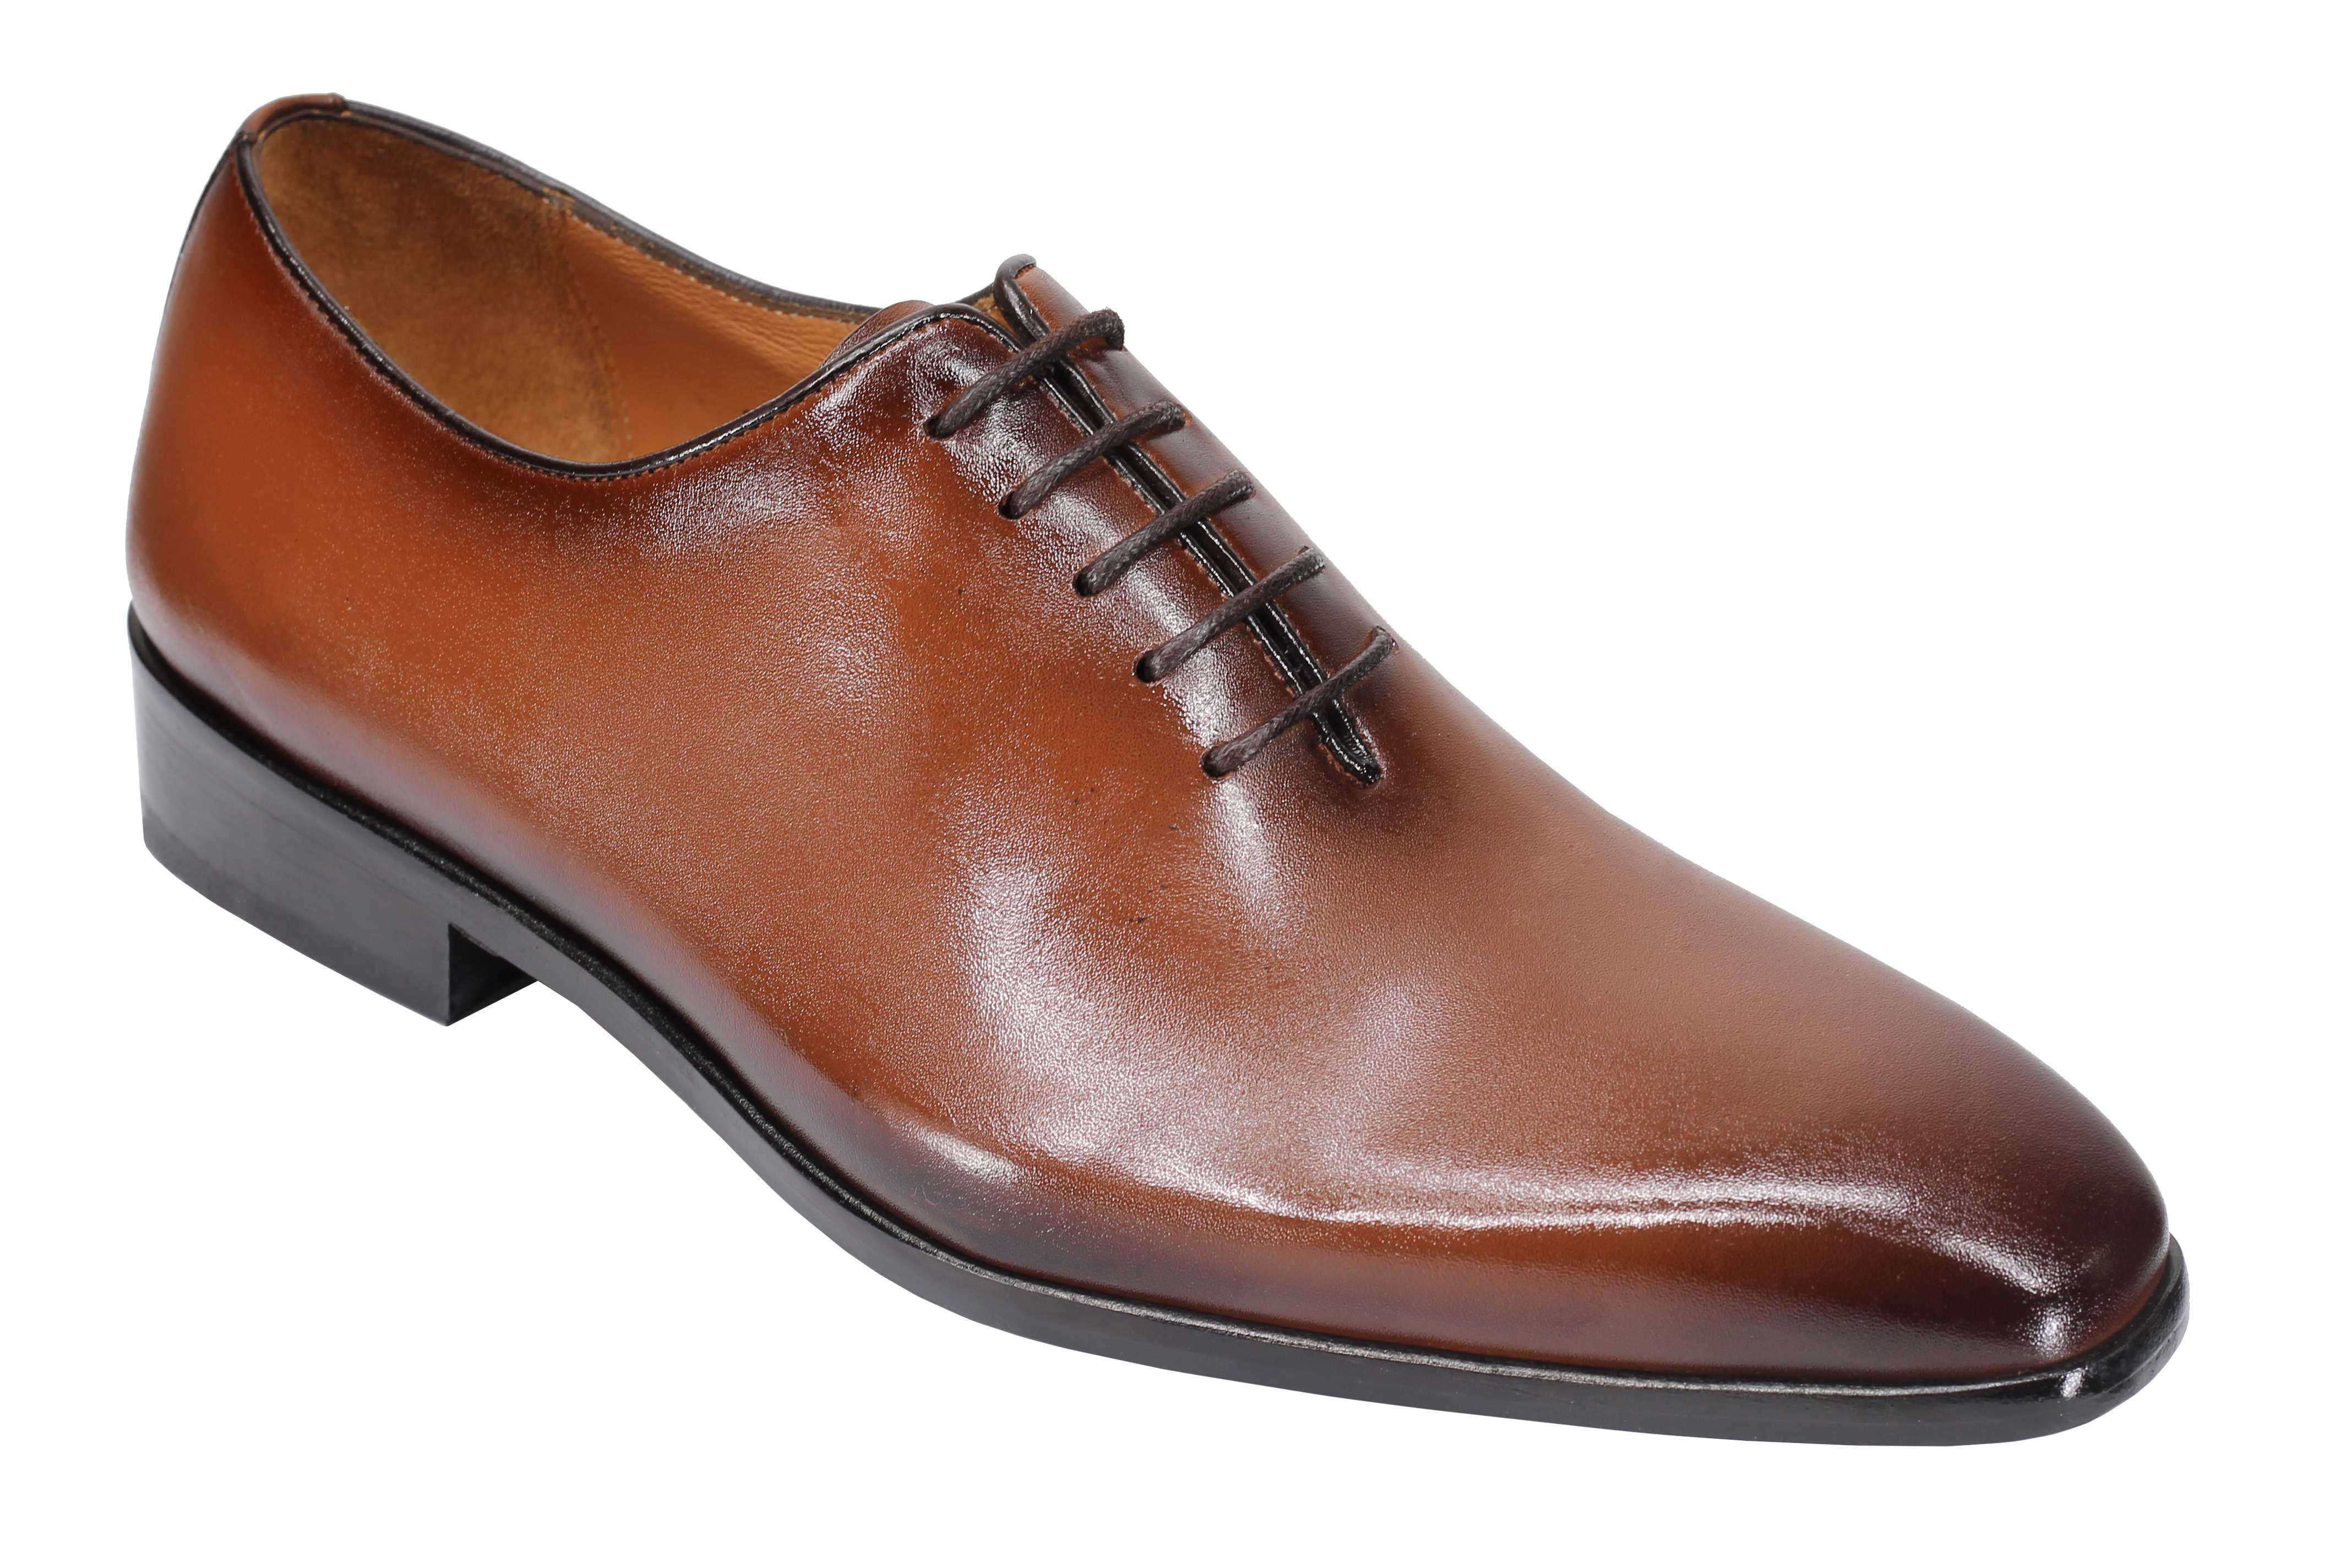 TAN CALF LEATHER WHOLECUT OXFORD LACE UP SHOES